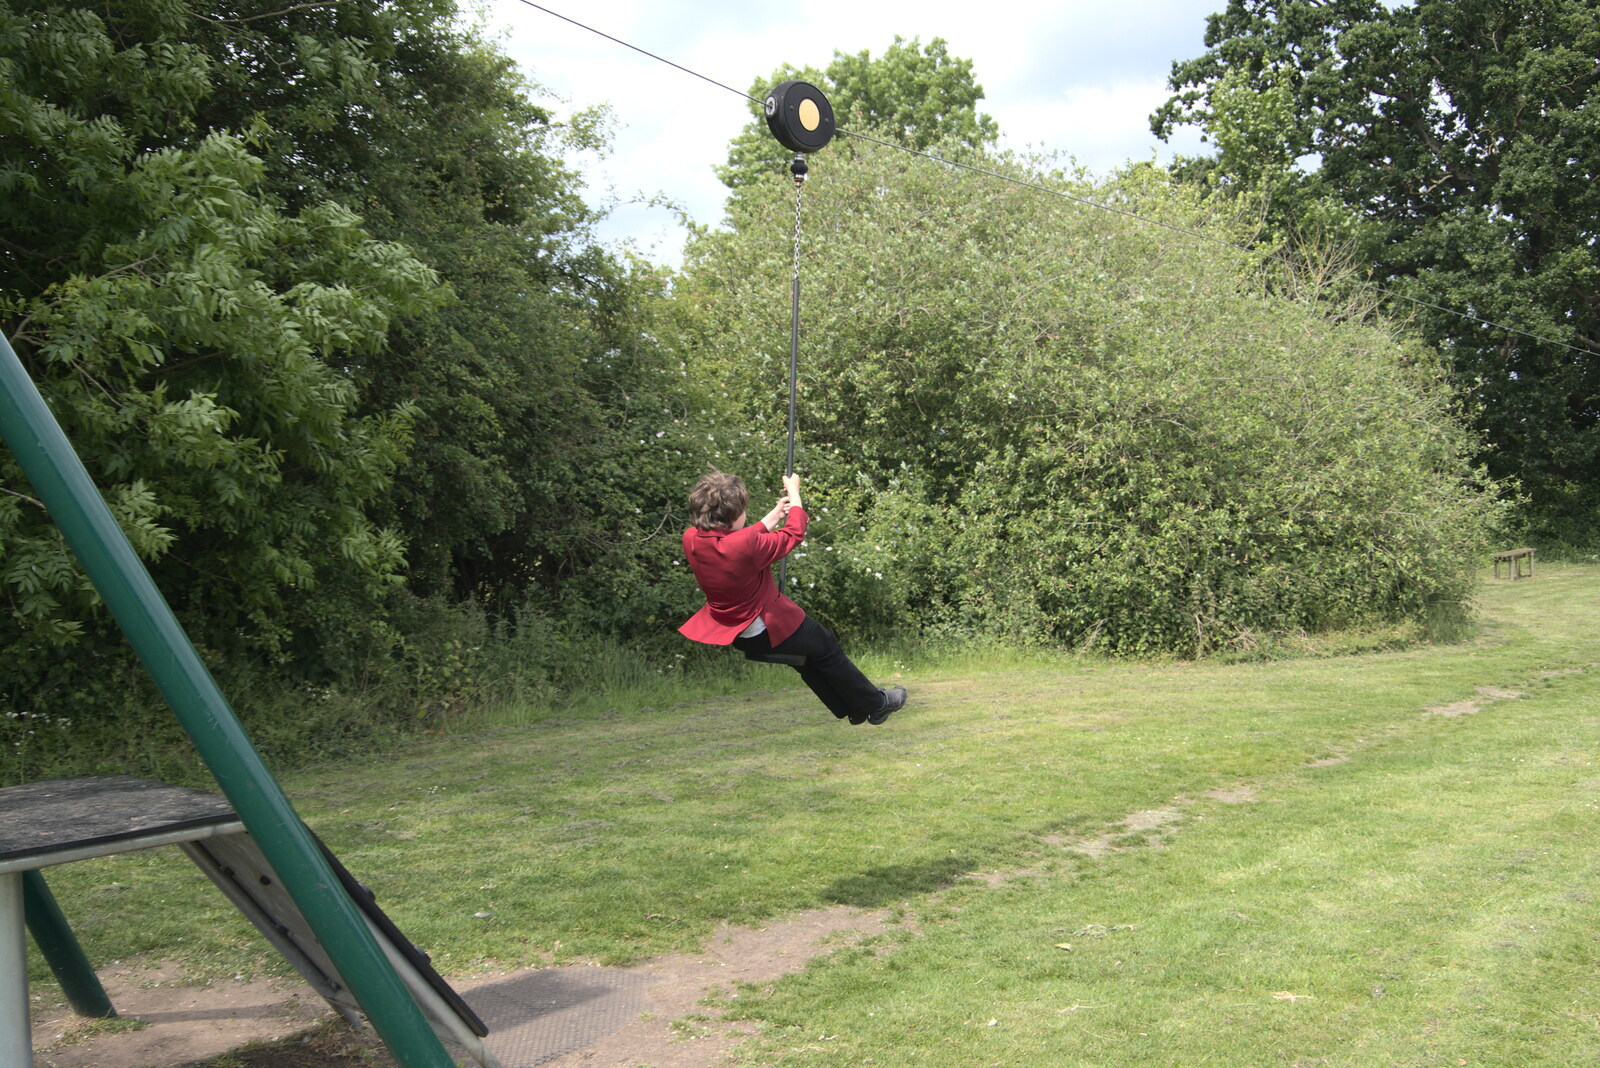 Fred finds a zipwire from The Gislingham Silver Band at Barningham, Suffolk - 3rd June 2022